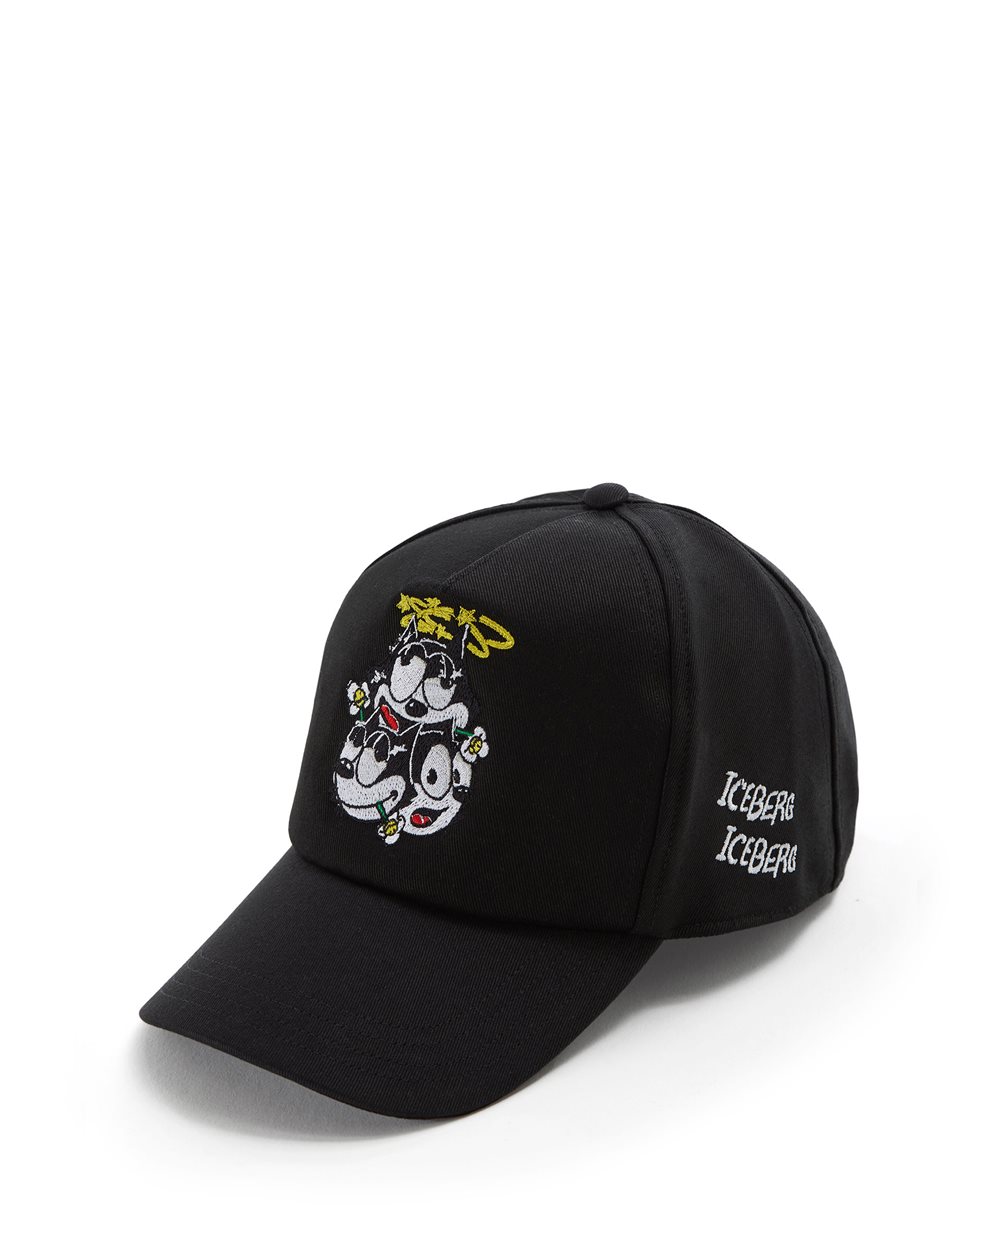 Baseball hat with cartoon graphics and logo - Iceberg - Official Website